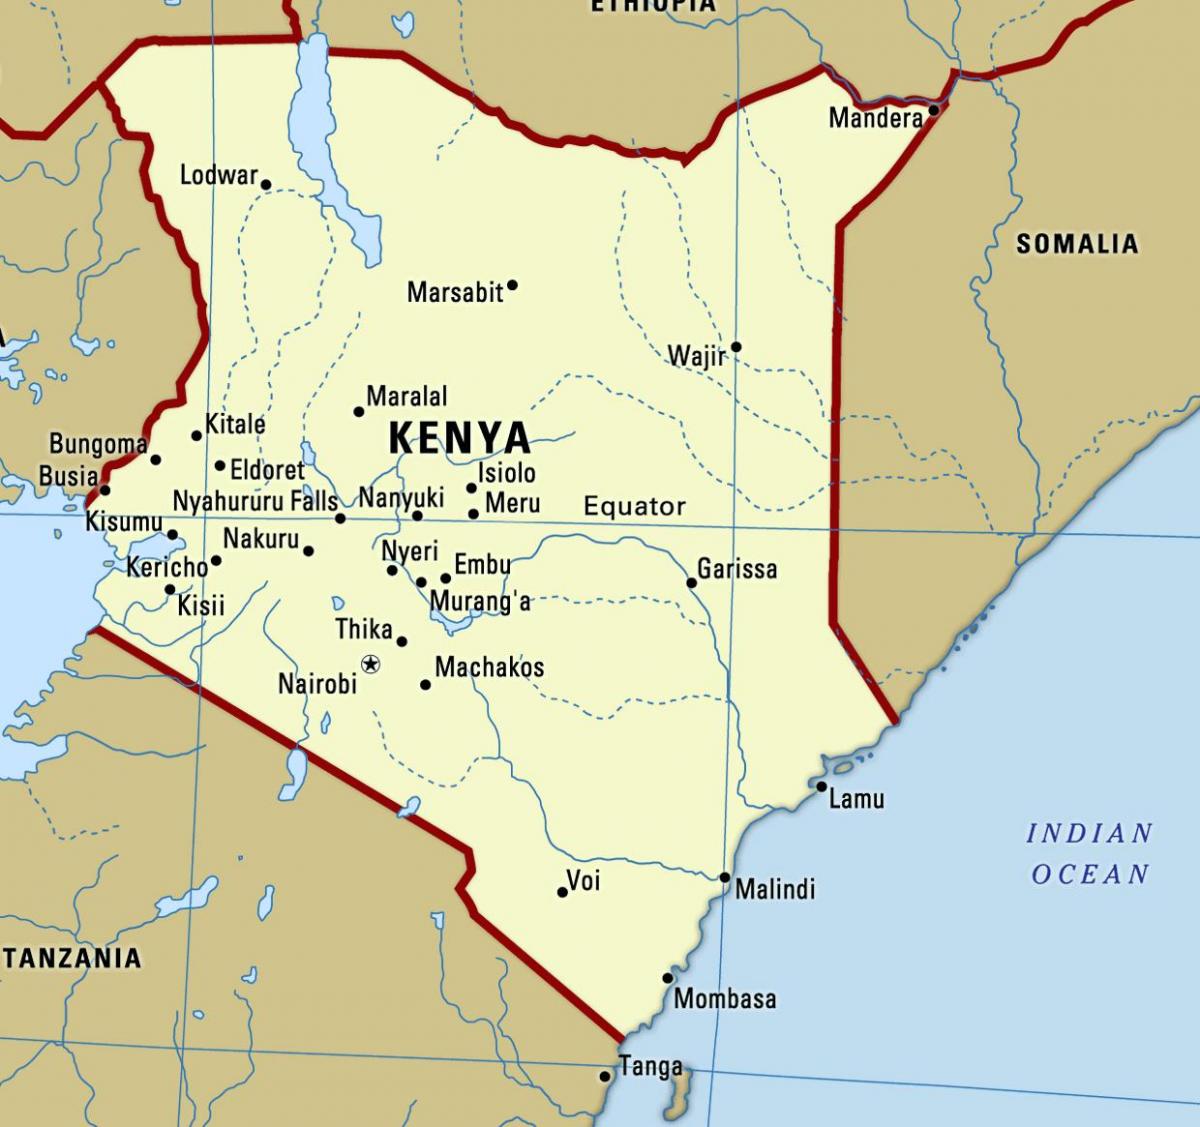 Kenya cities map - Map of Kenya with cities (Eastern Africa - Africa)